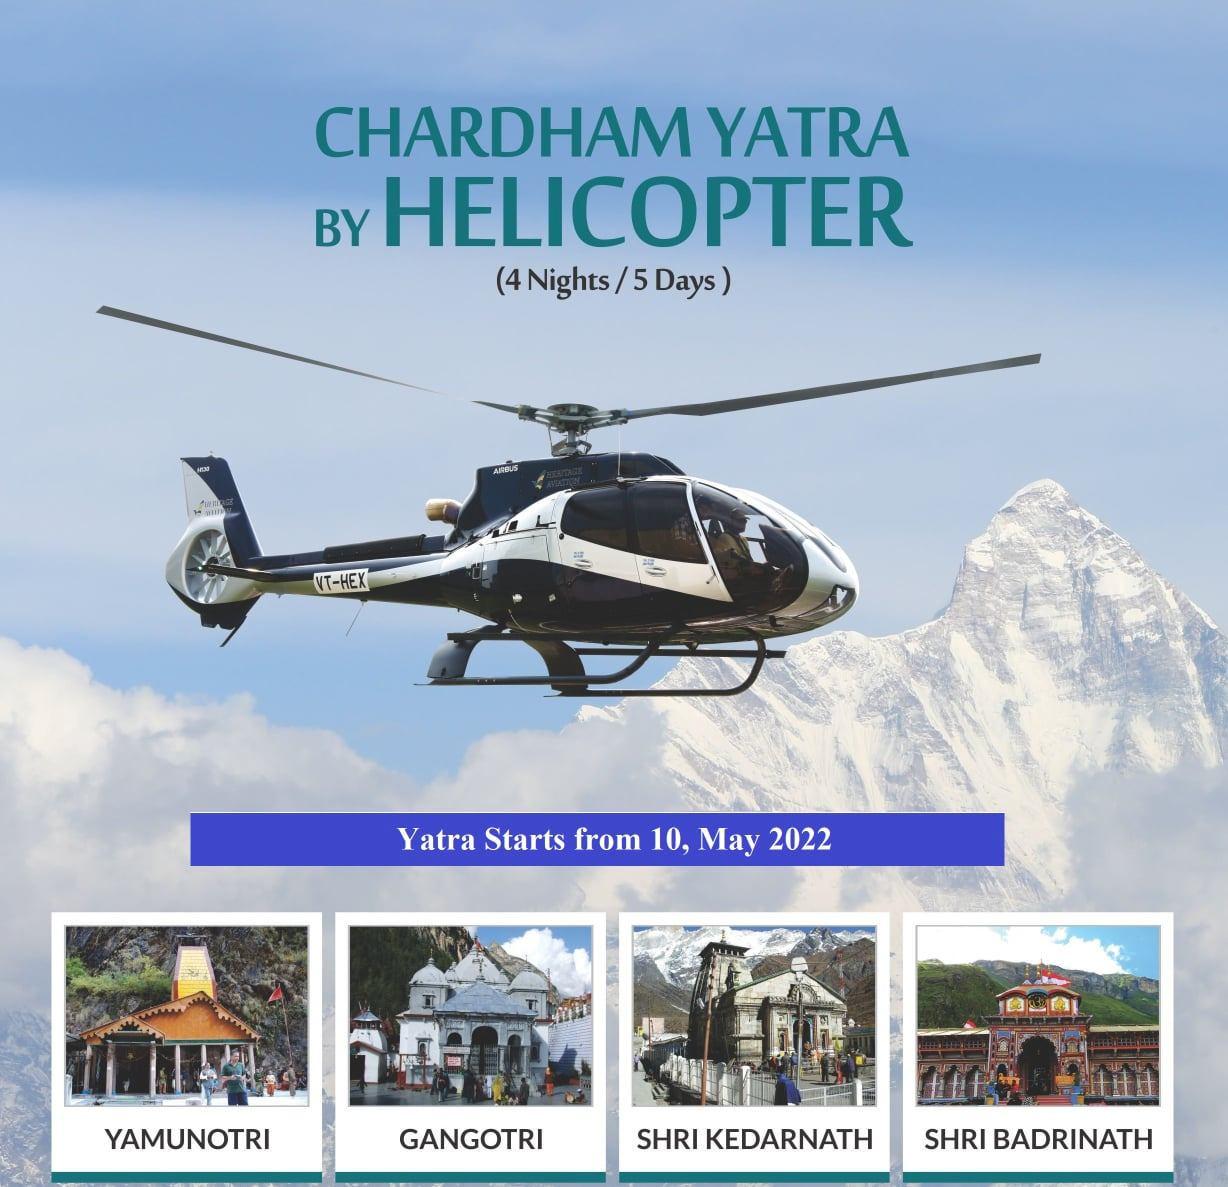 Book Chardham Yatra Packages at Best Price in 2022